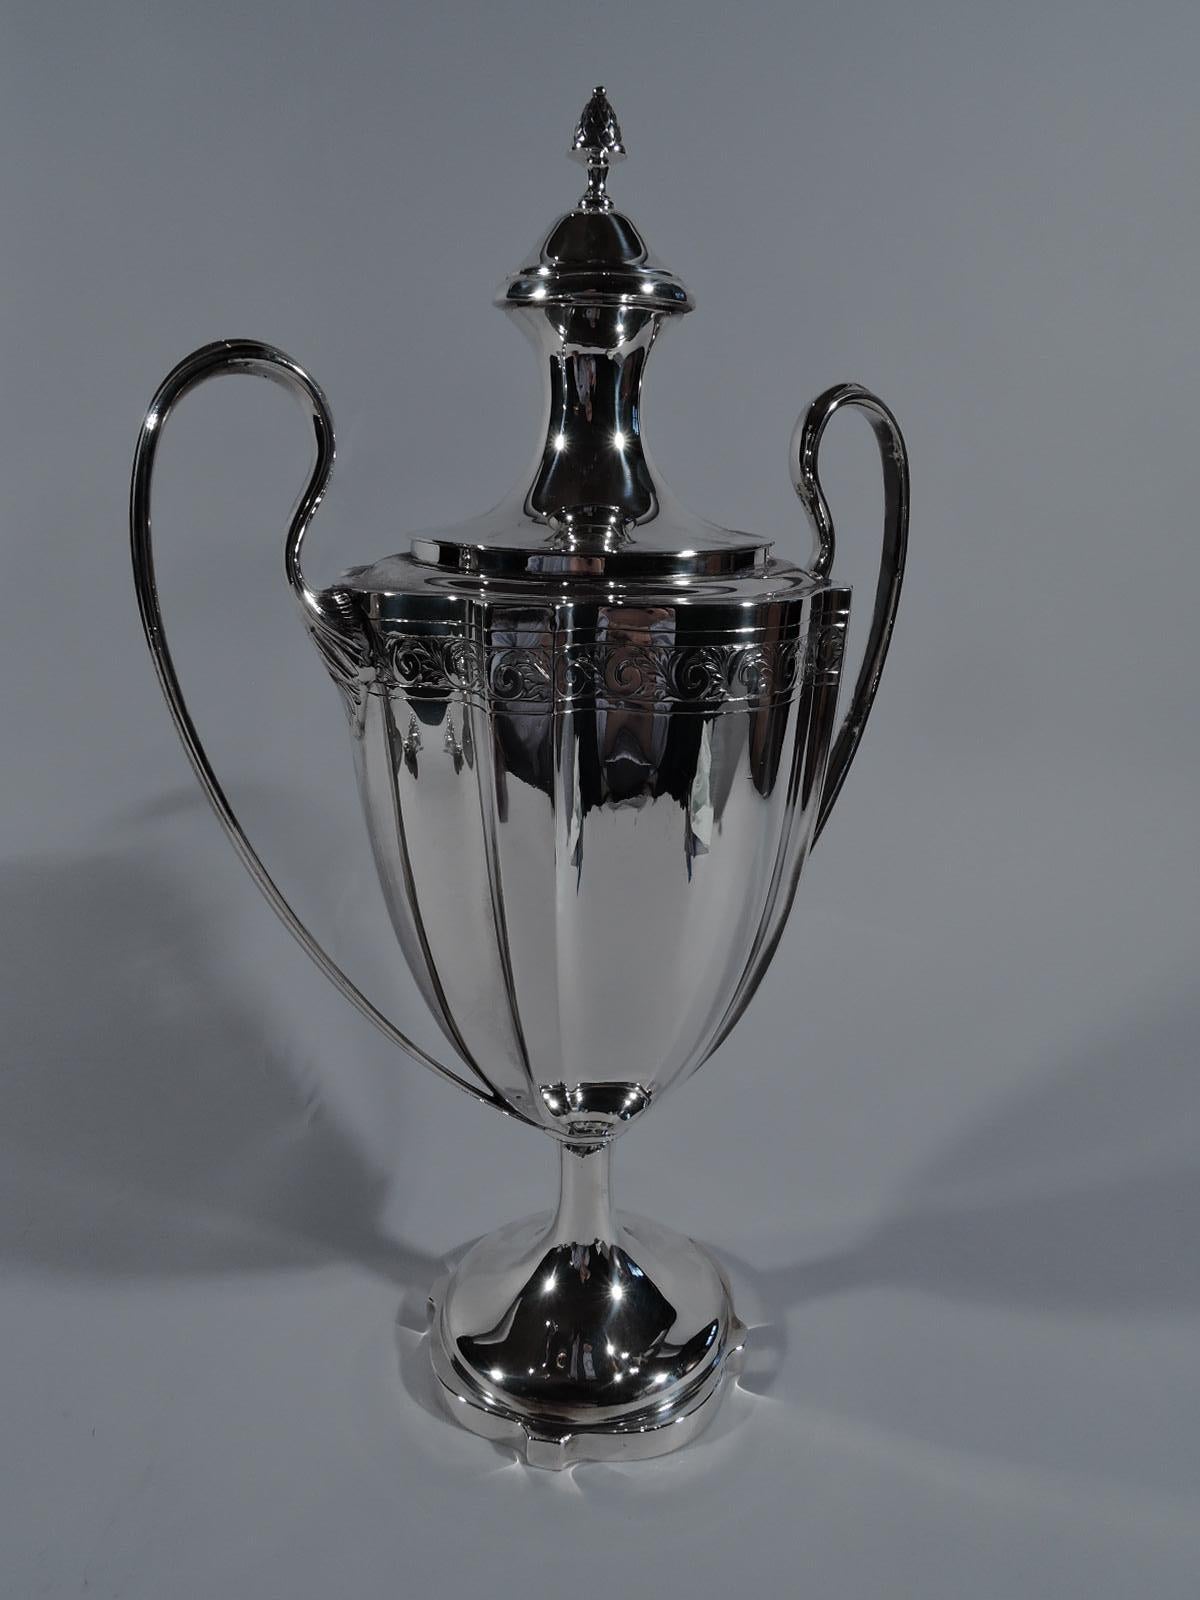 American sterling silver trophy, circa 1910. Classical amphora with curvilinear ovoid body on cylindrical stem flowing into raised foot with curvilinear rim. High-looping and leaf-mounted side handles. Double-domed cover with berry finial. Engraved